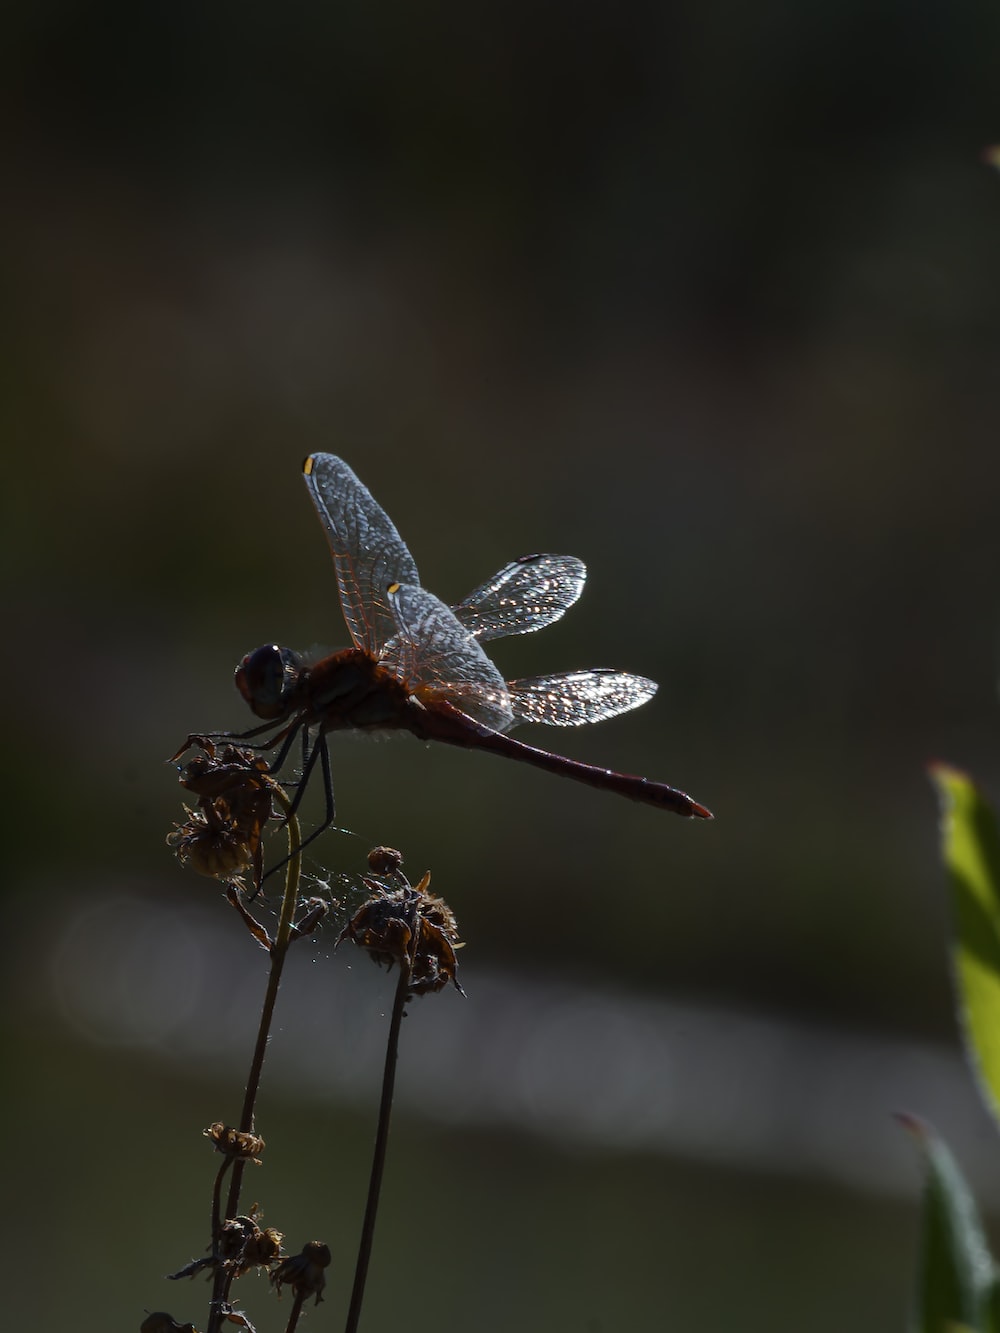 brown and white dragonfly perched on brown stem in close up photography during daytime